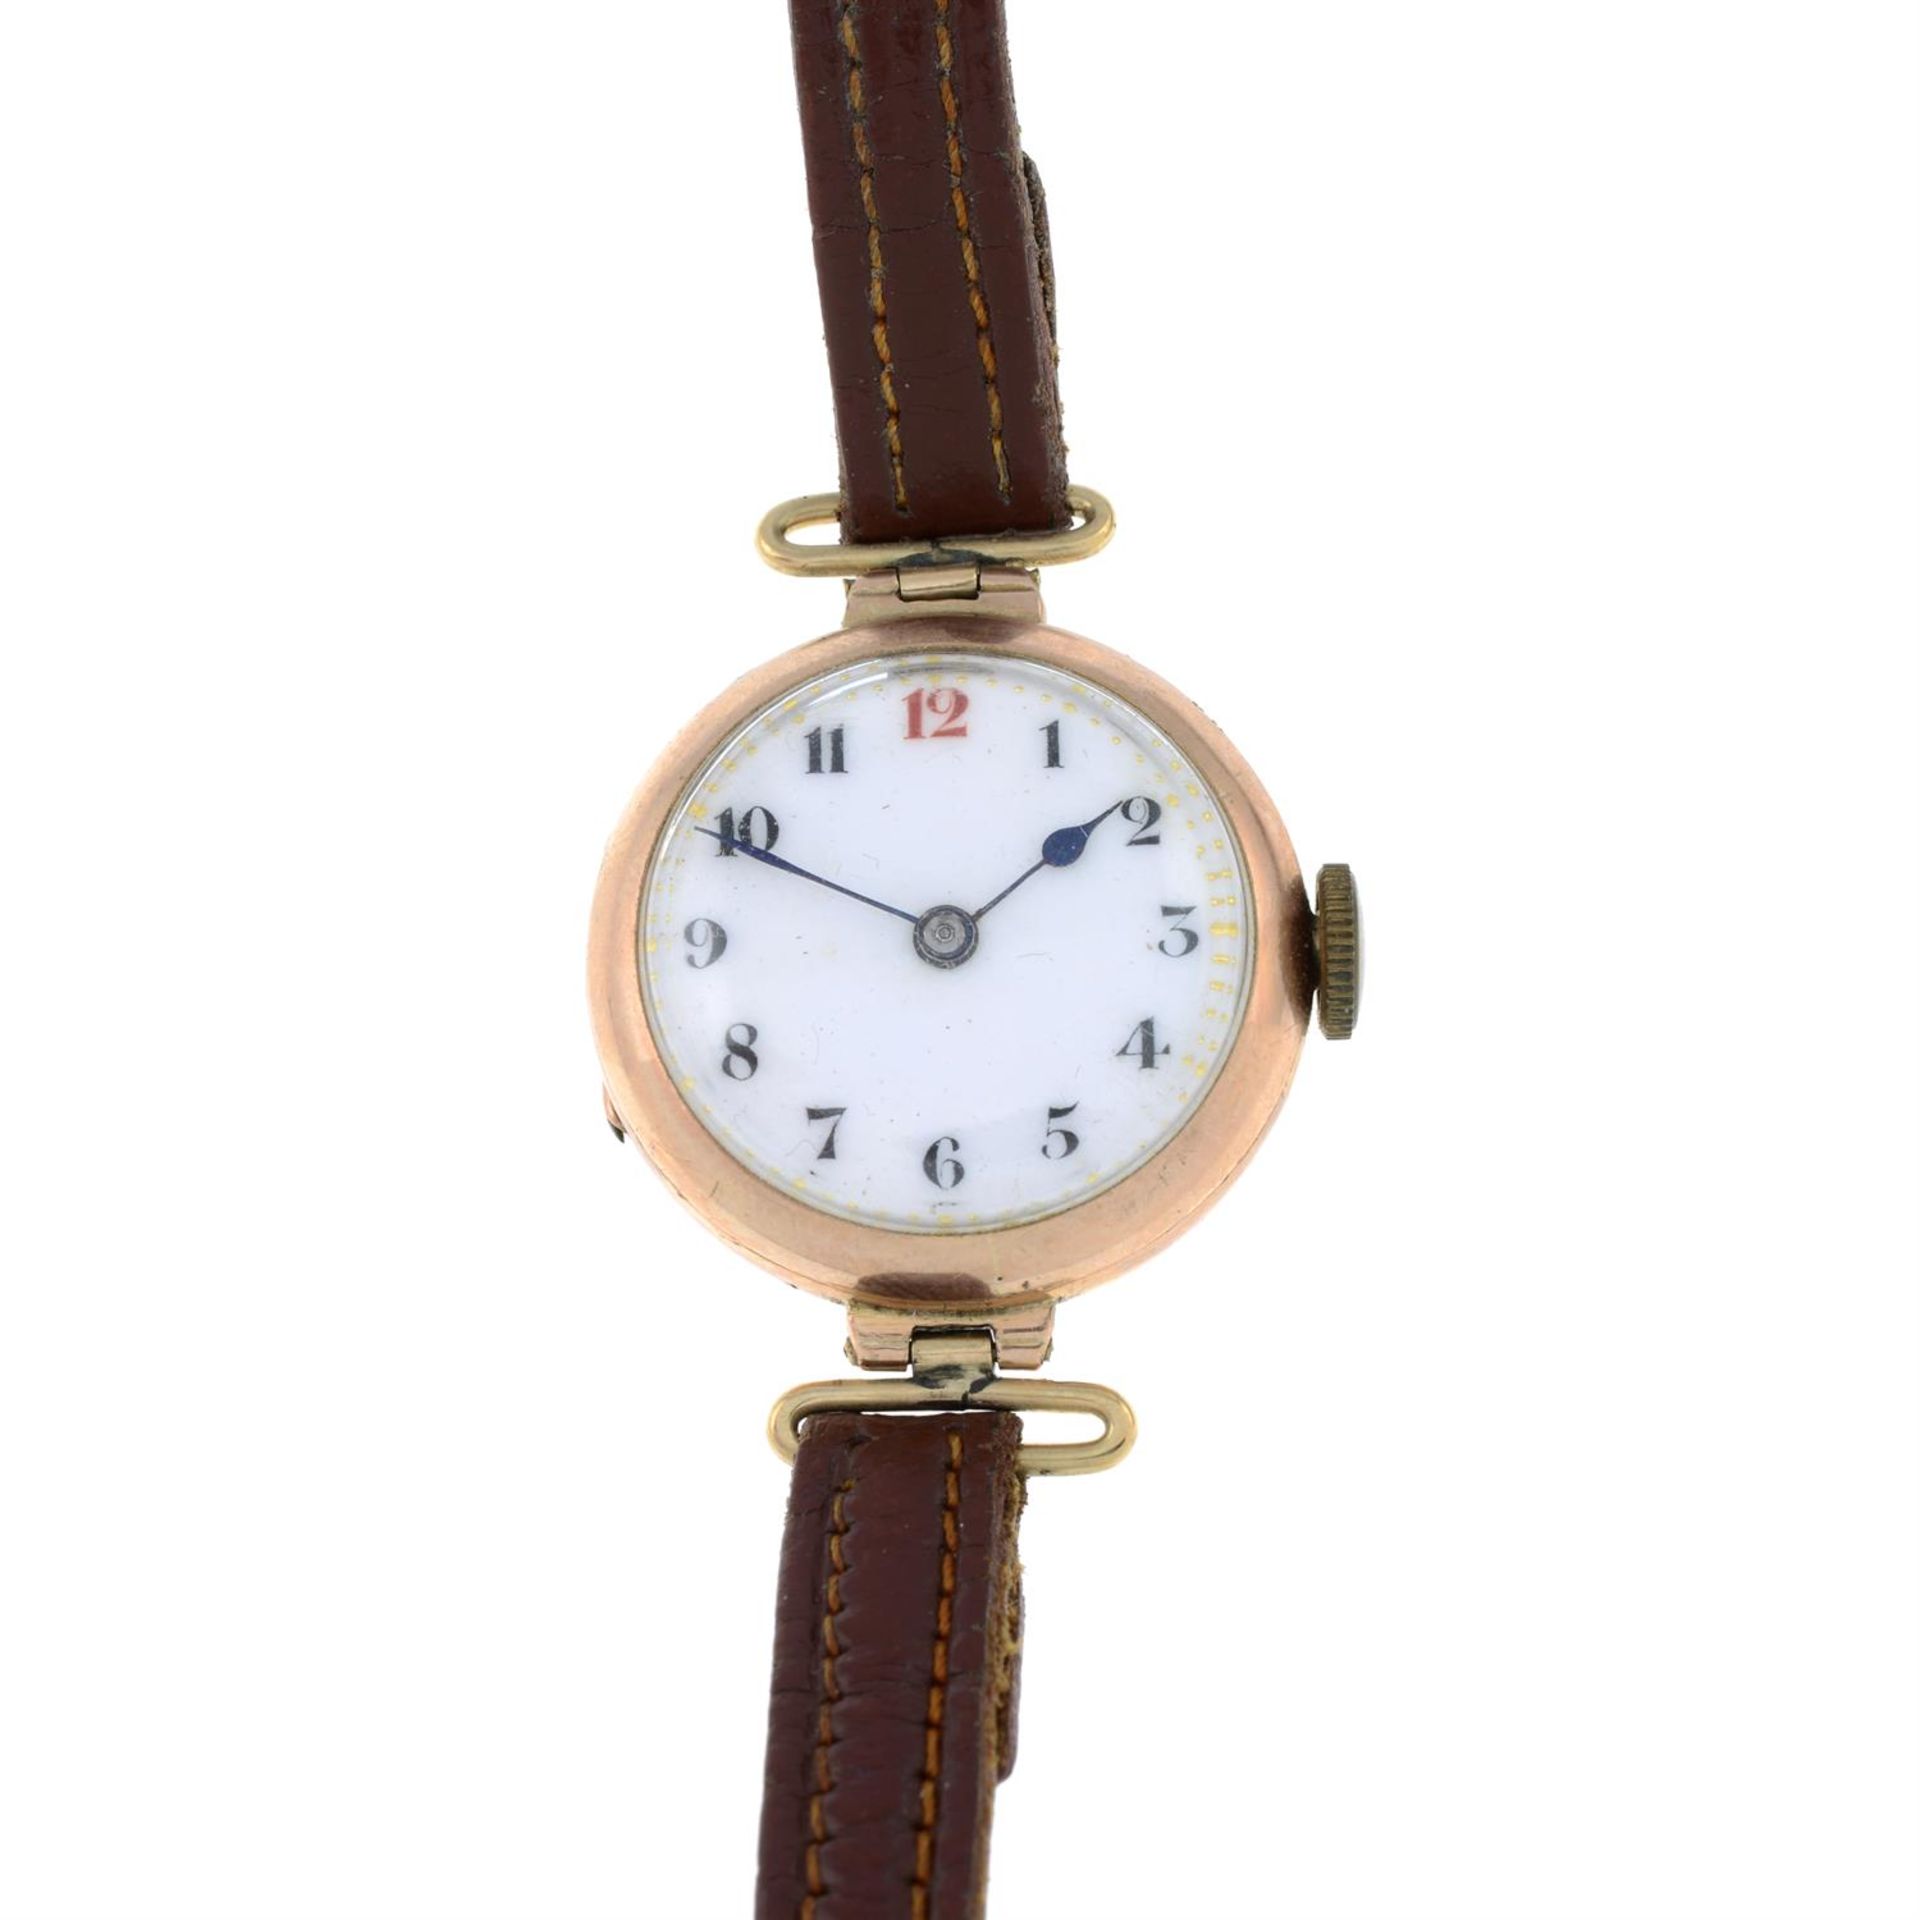 An early 20th century gold wrist watch, with replacement strap.